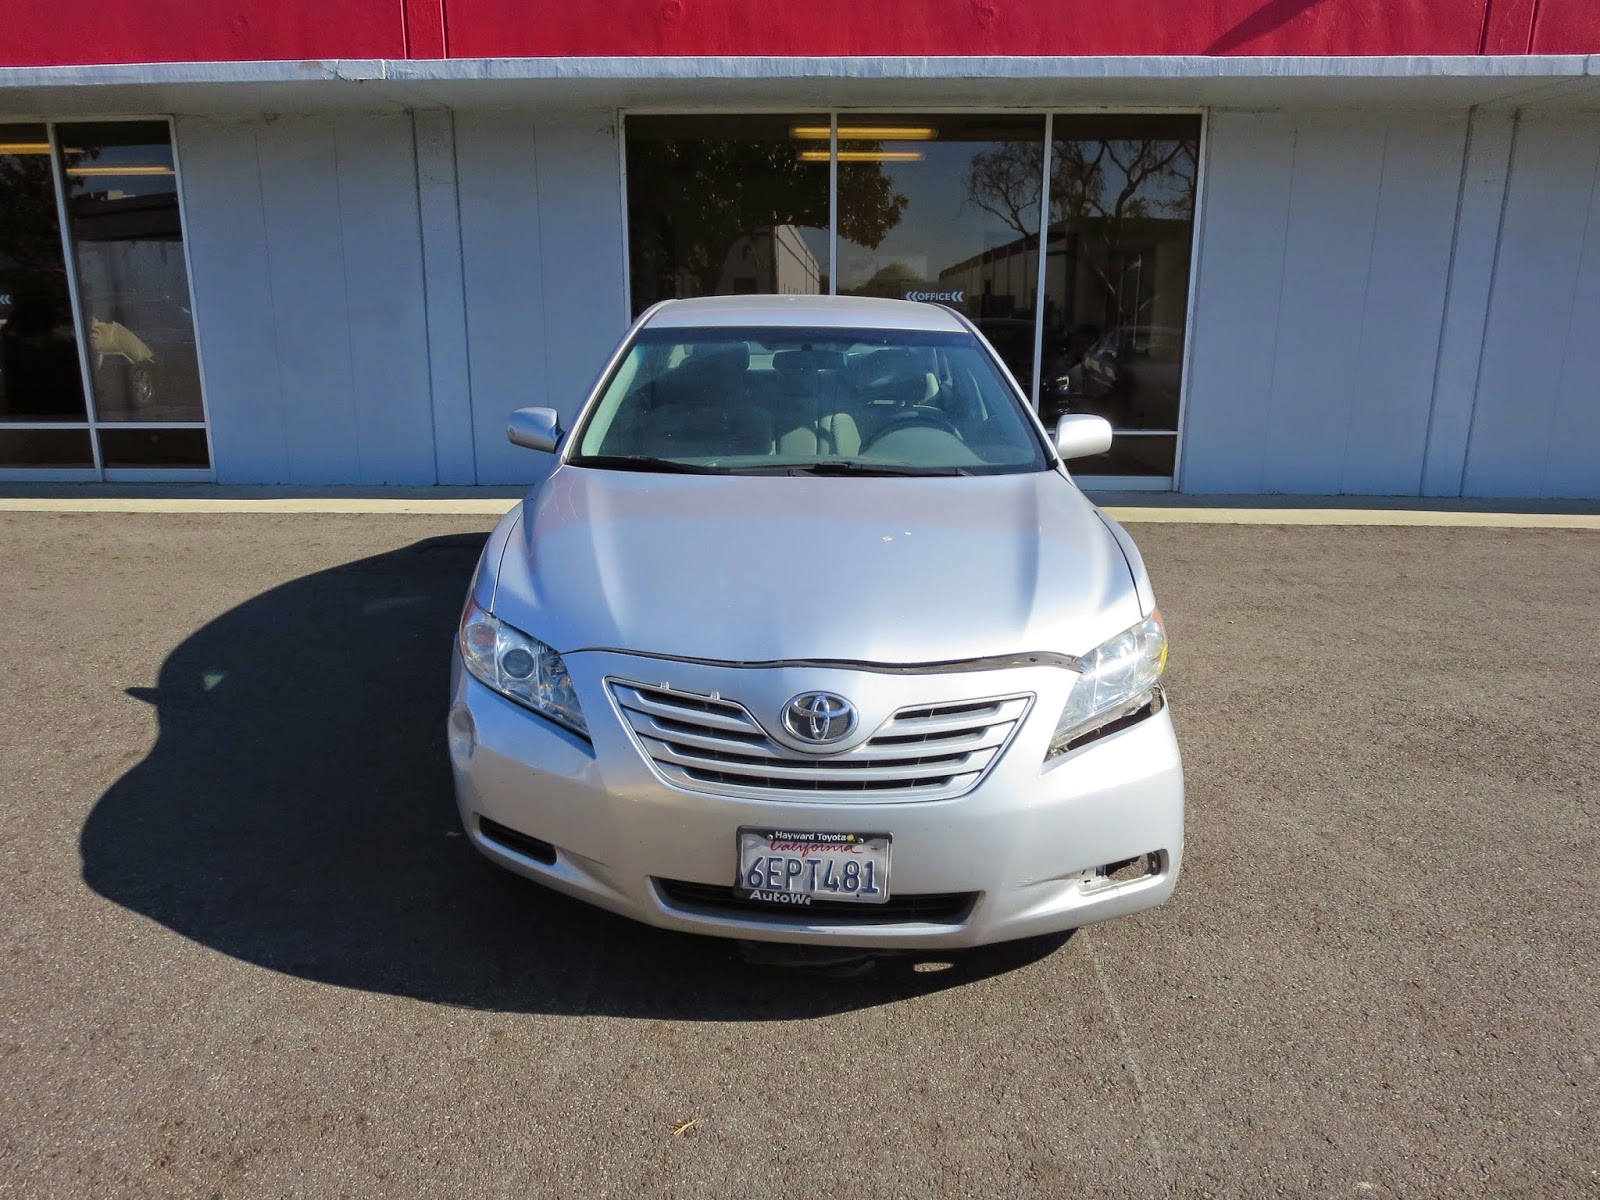 Collision damage on 2009 Toyota Camry in Fremont, CA